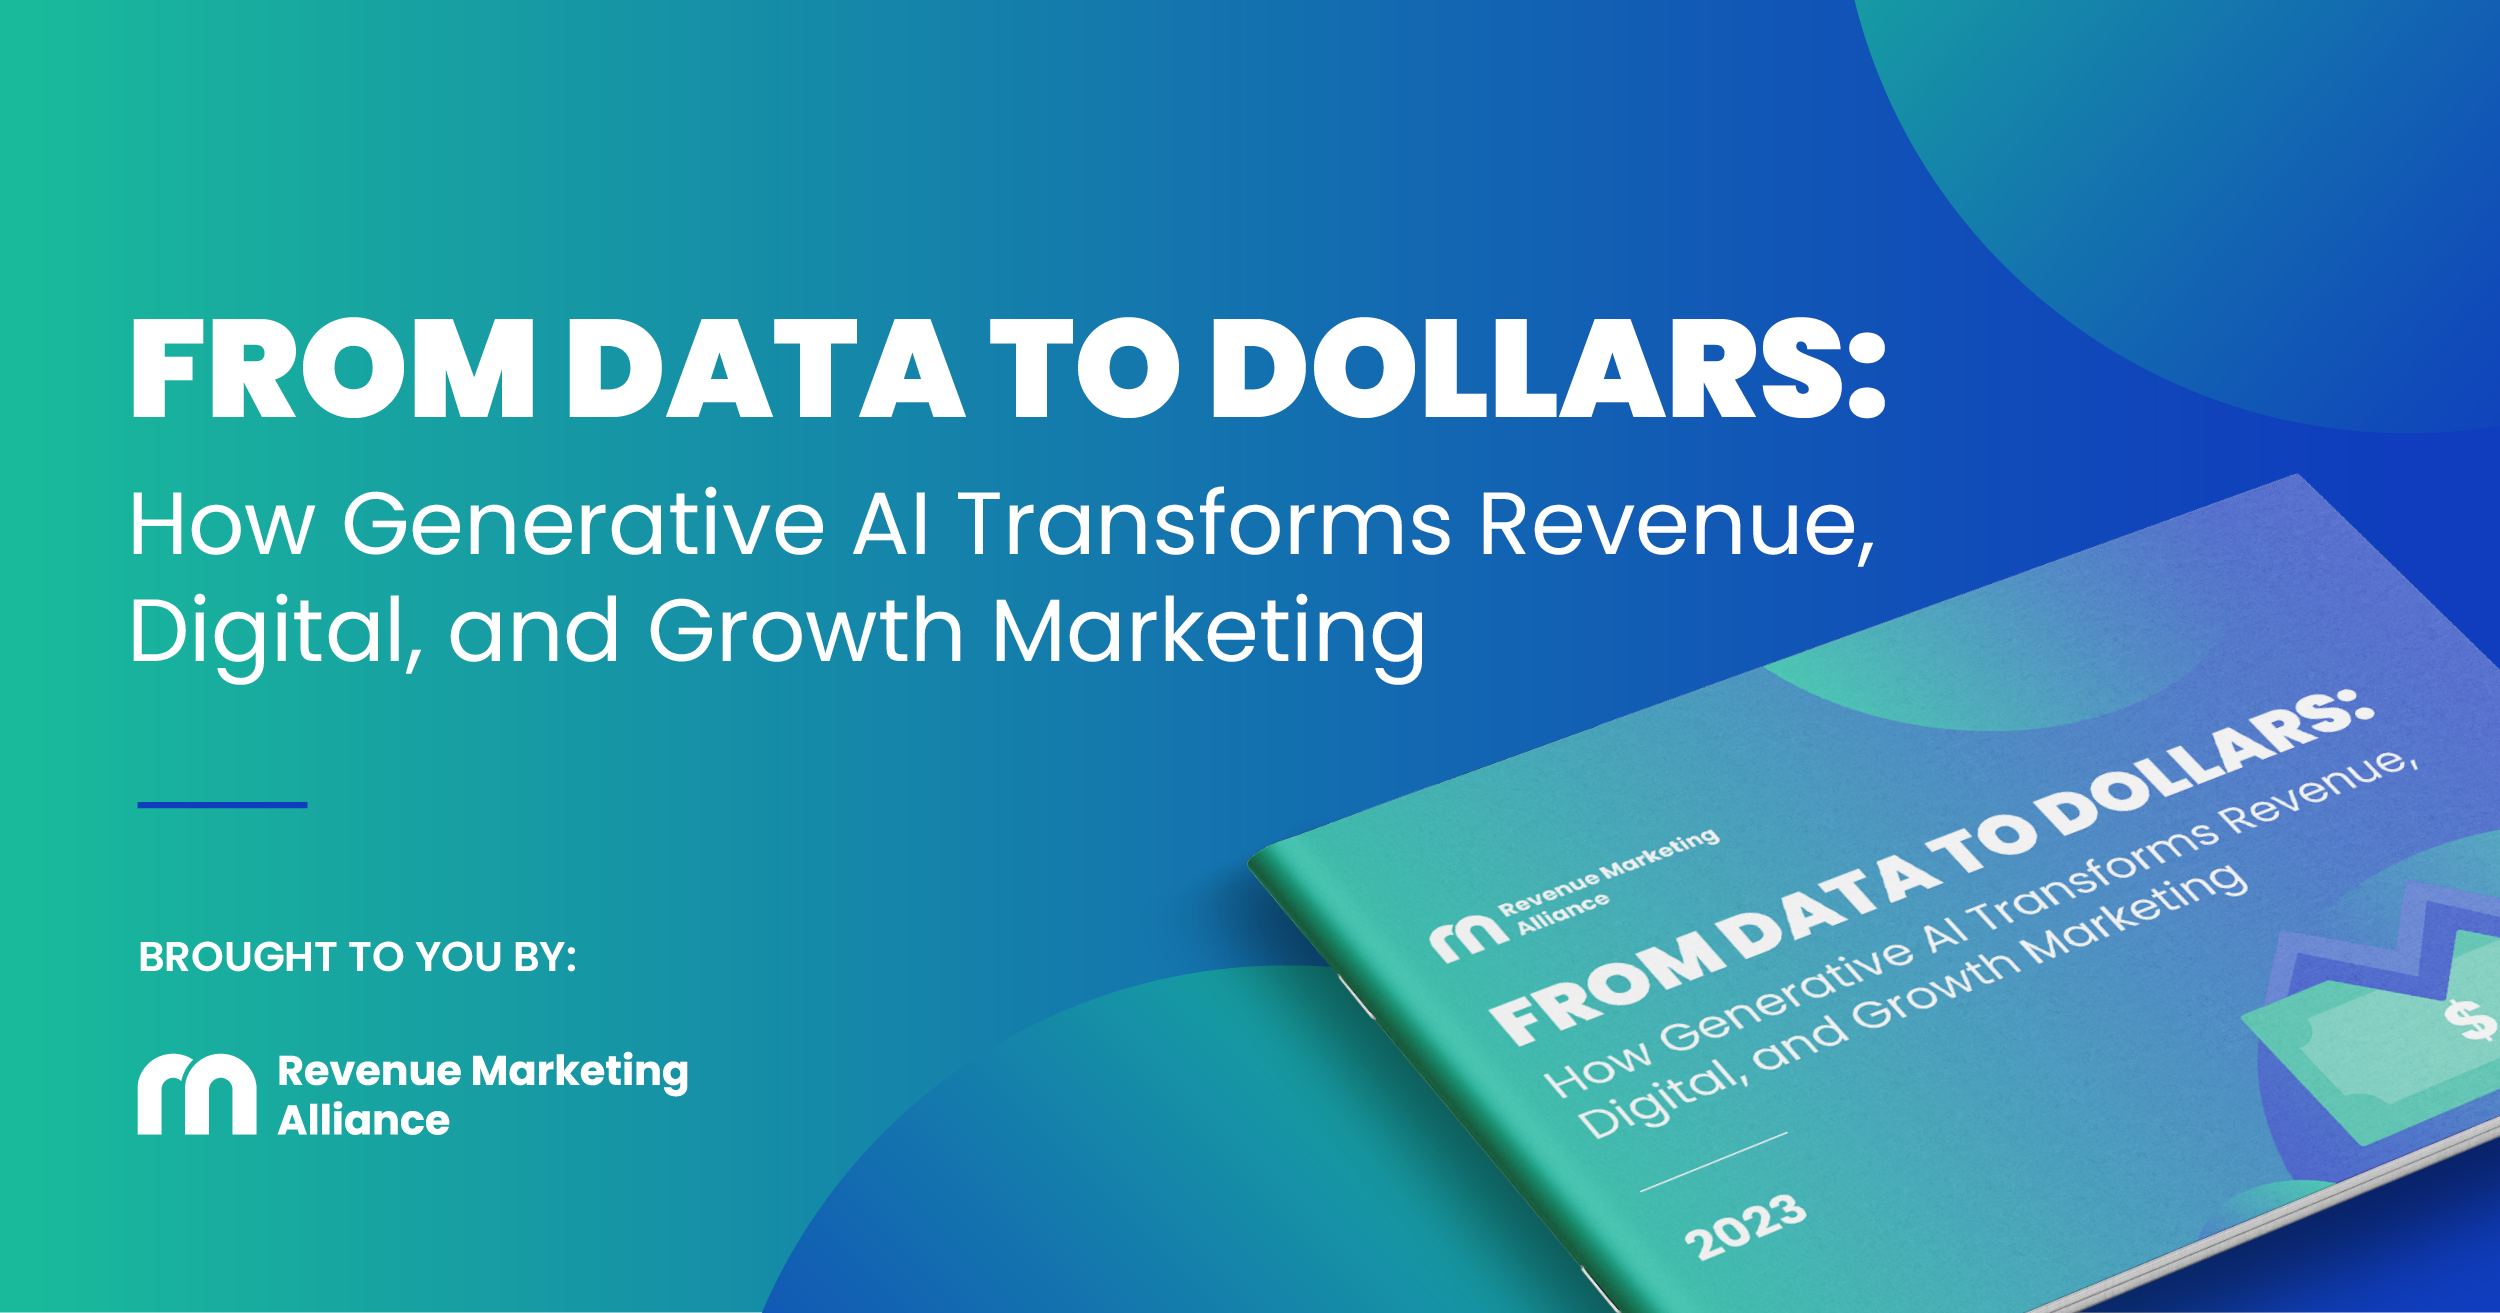 From data to dollars: How generative AI transforms revenue, digital, and growth marketing.